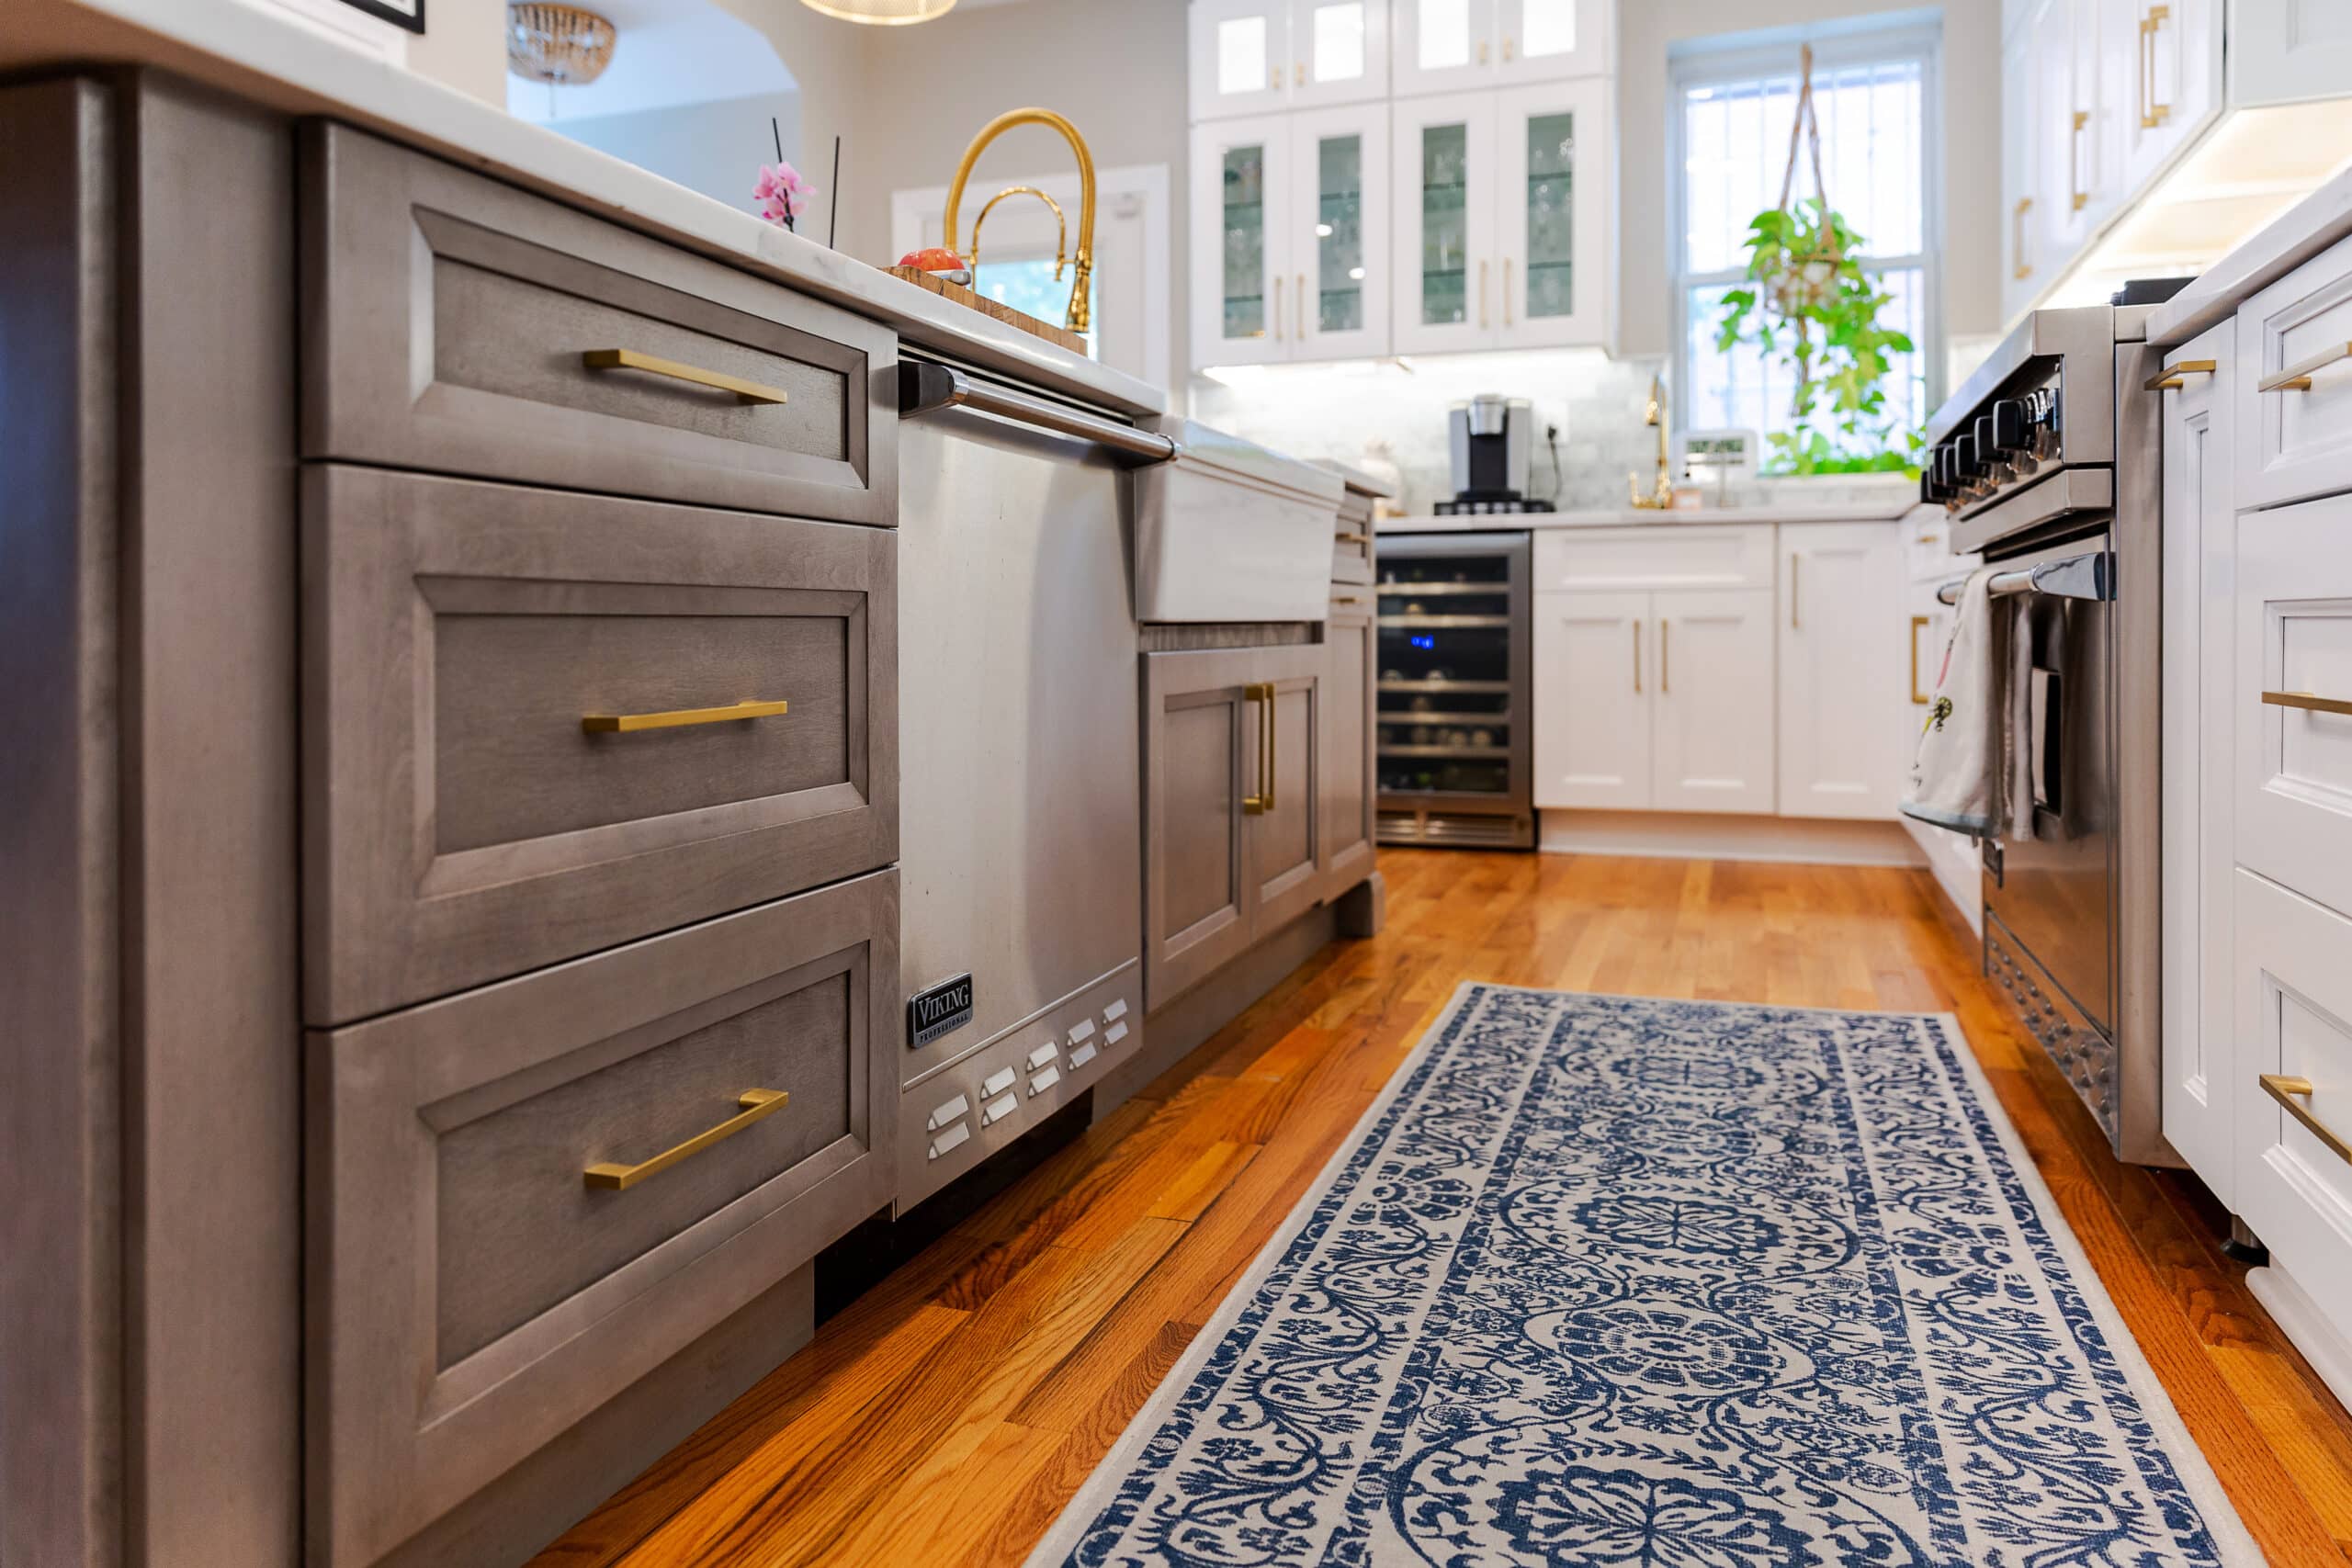 A kitchen with brown and white cabinets and a blue rug